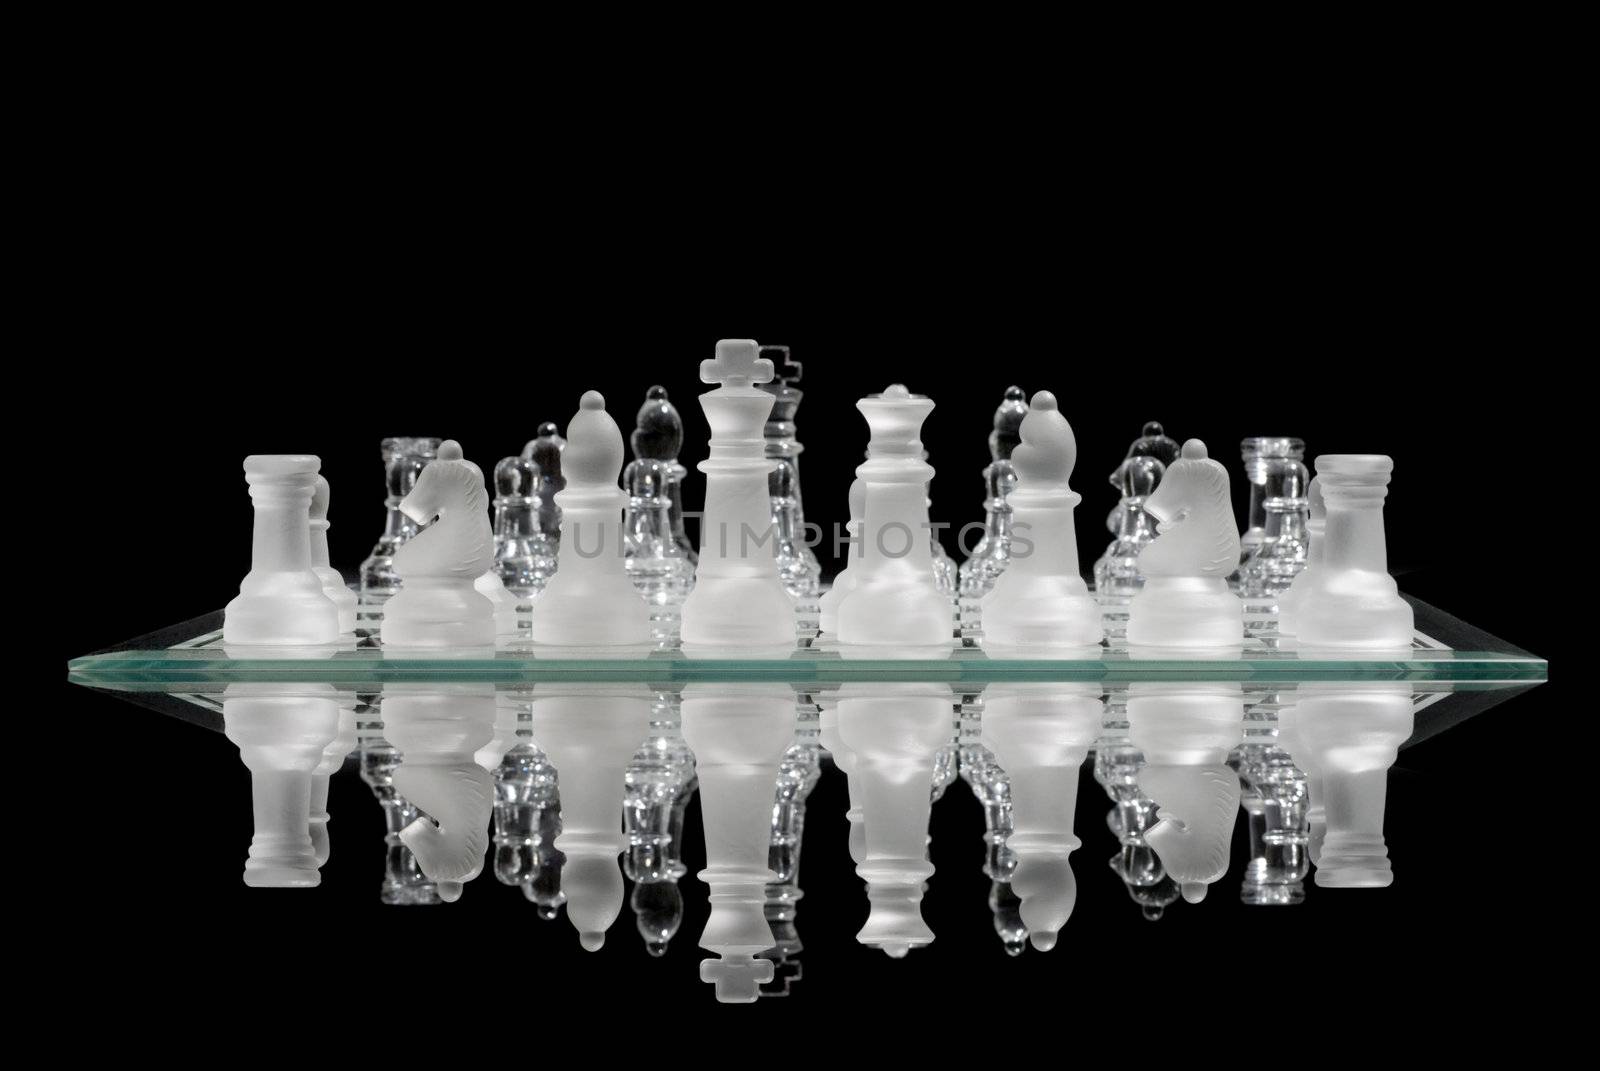 Chess game reflection with black background